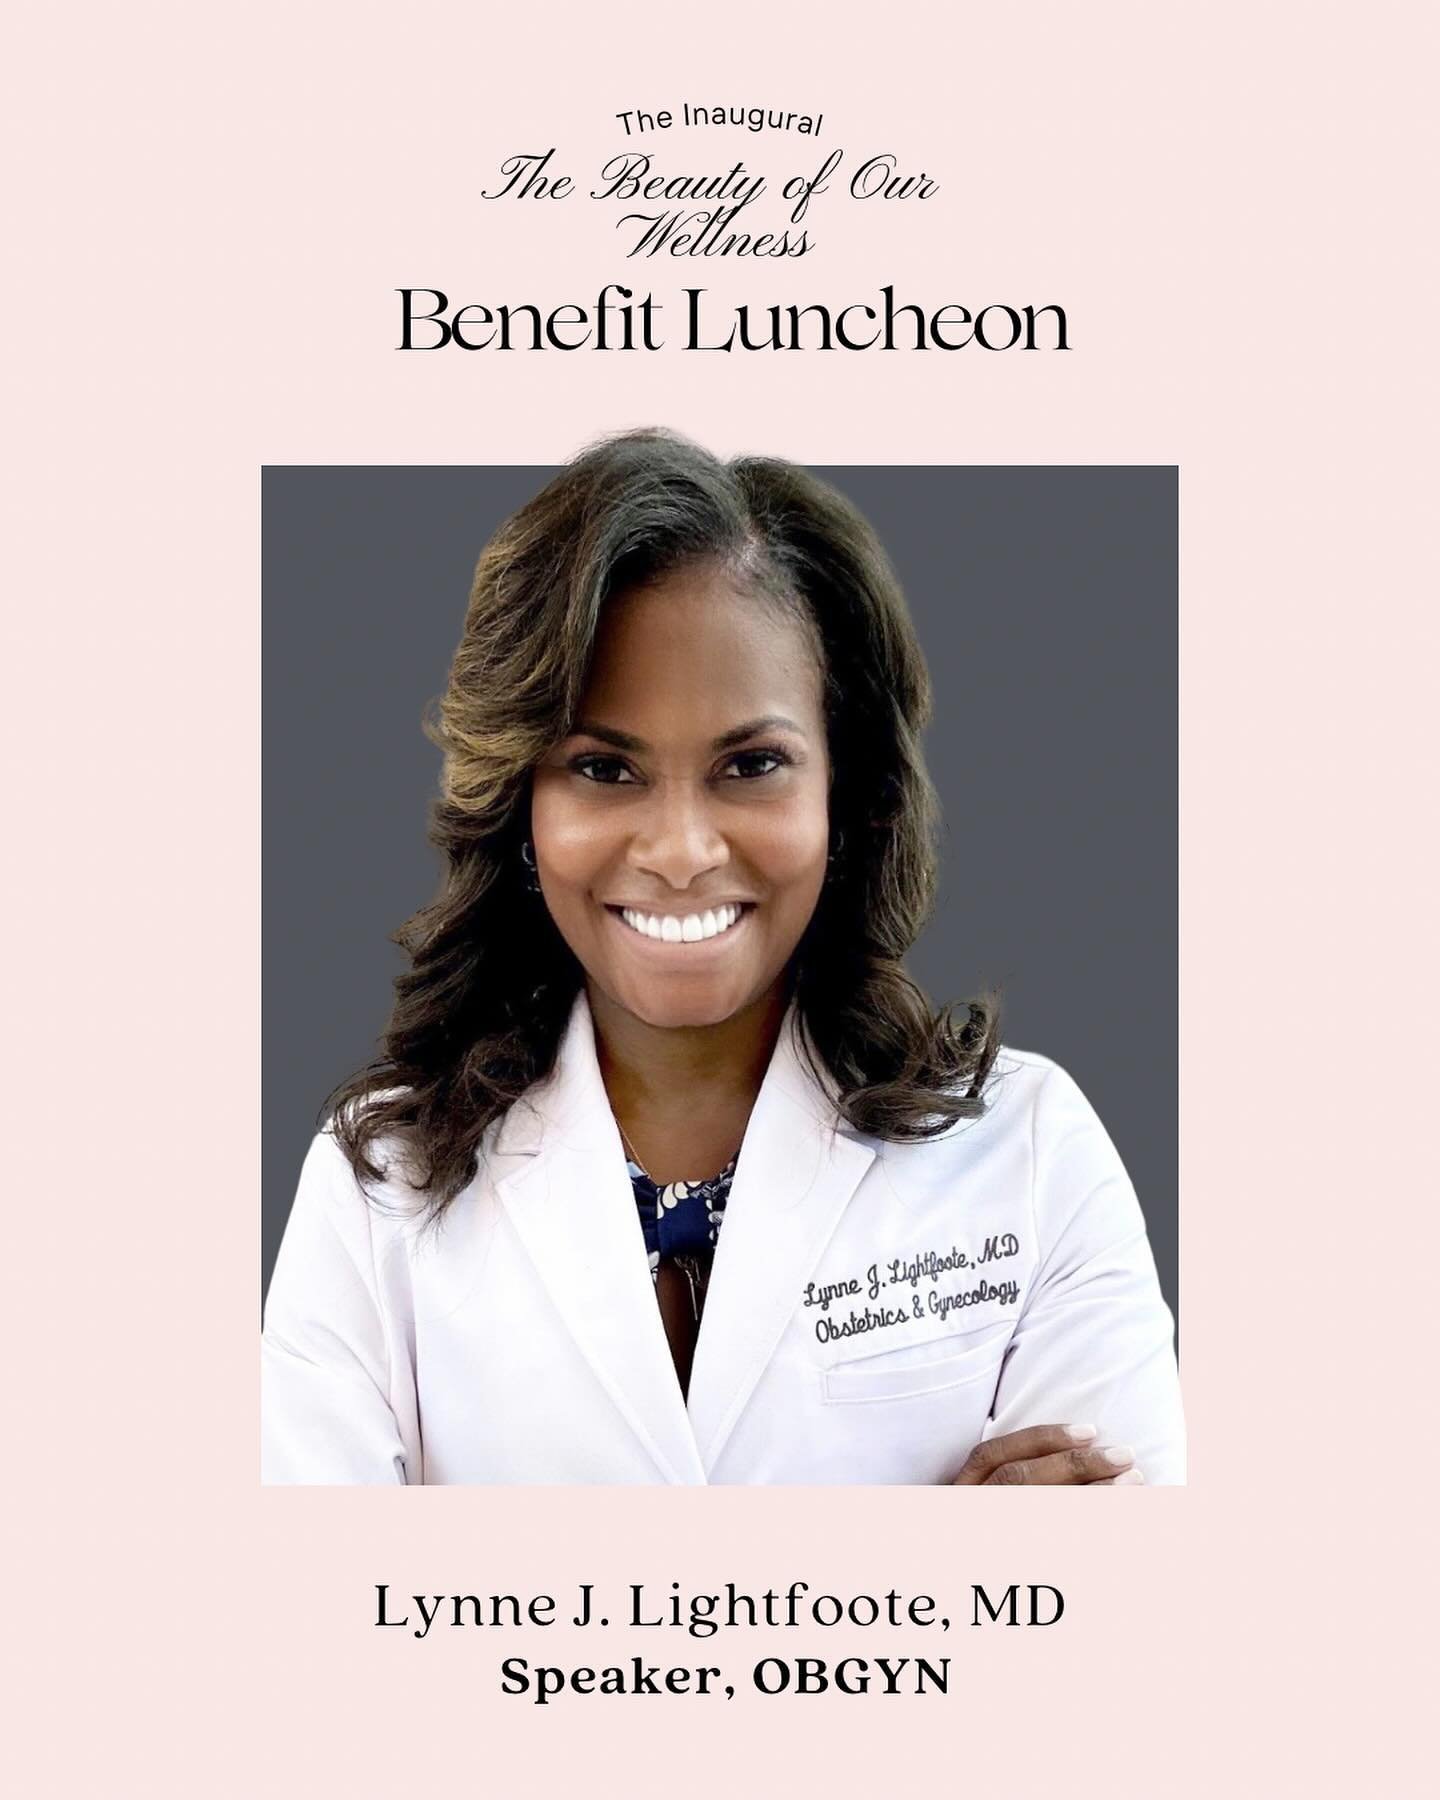 🌸 We are excited to announce our palen moderator, Dr. Lynne Lightfoote, MD who is renowned as one of Washington, D. C.&rsquo;s best OGBYNs. 

Her insight, professional excellence, and care for women will be help her to guide a wonderful conversation